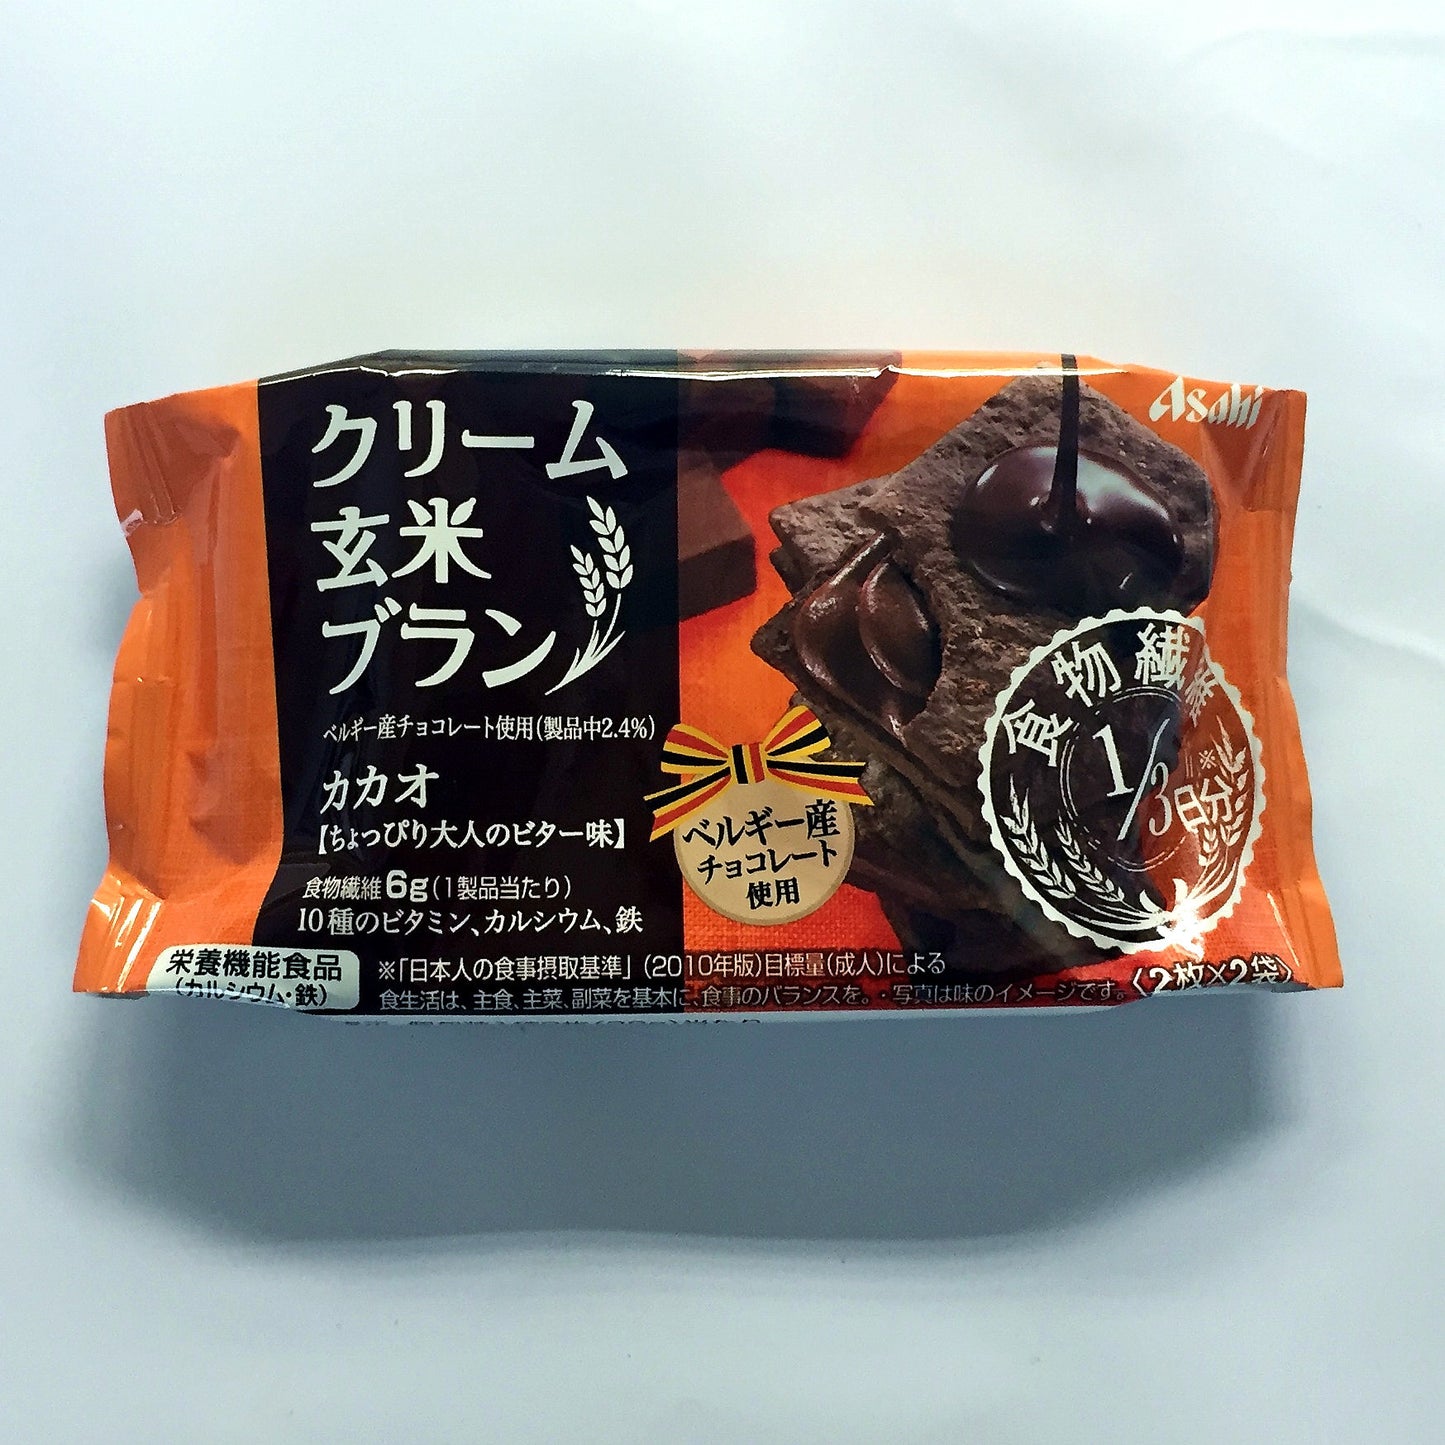 Asahi Brown Rice Sandwich Biscuits - Chocolate Flavor